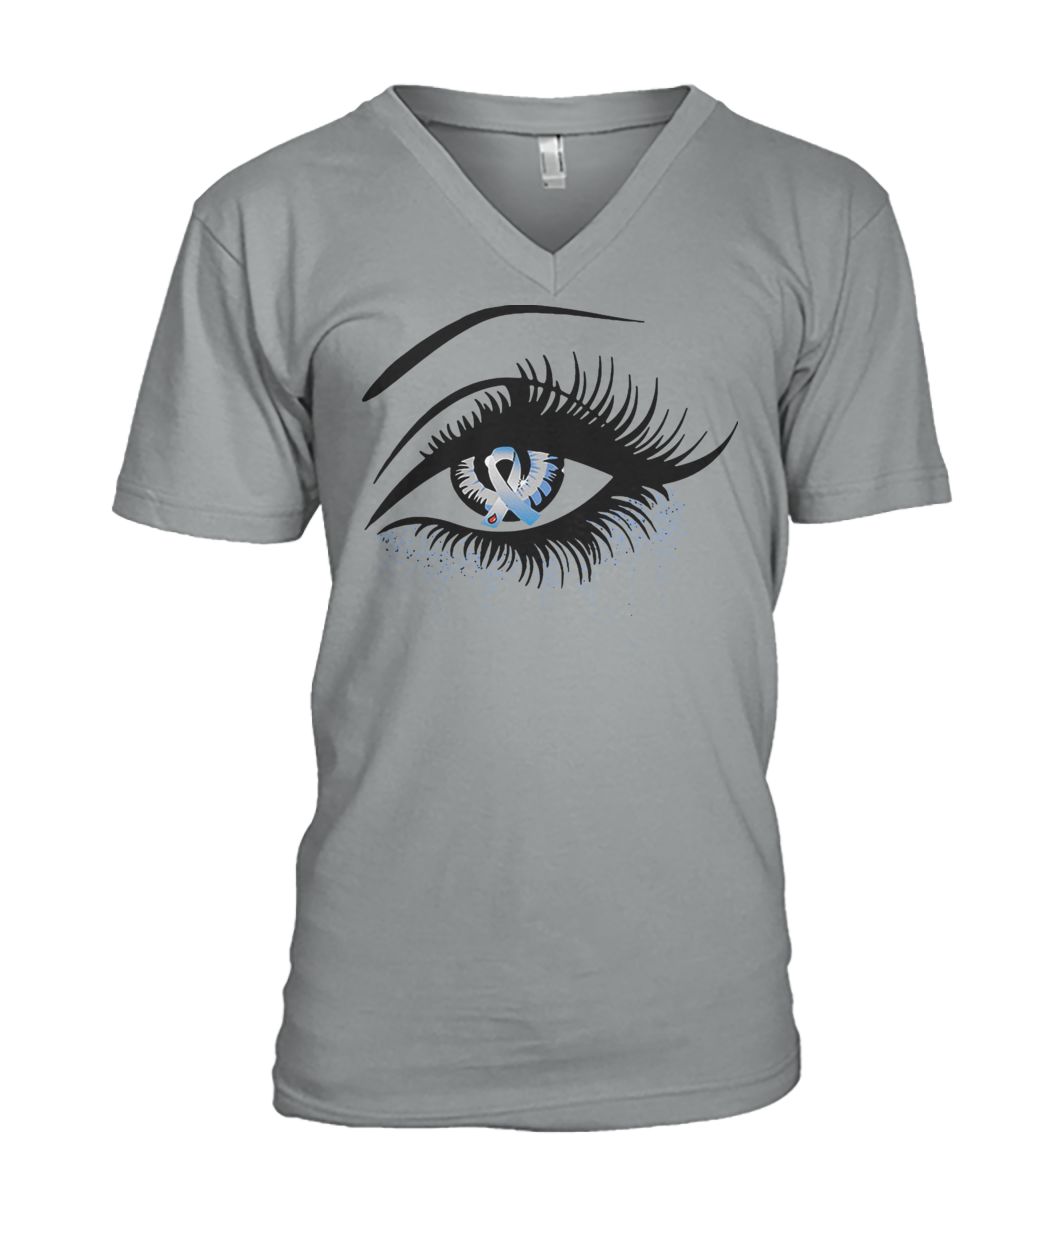 Diabetes and cancer awareness in the eye mens v-neck